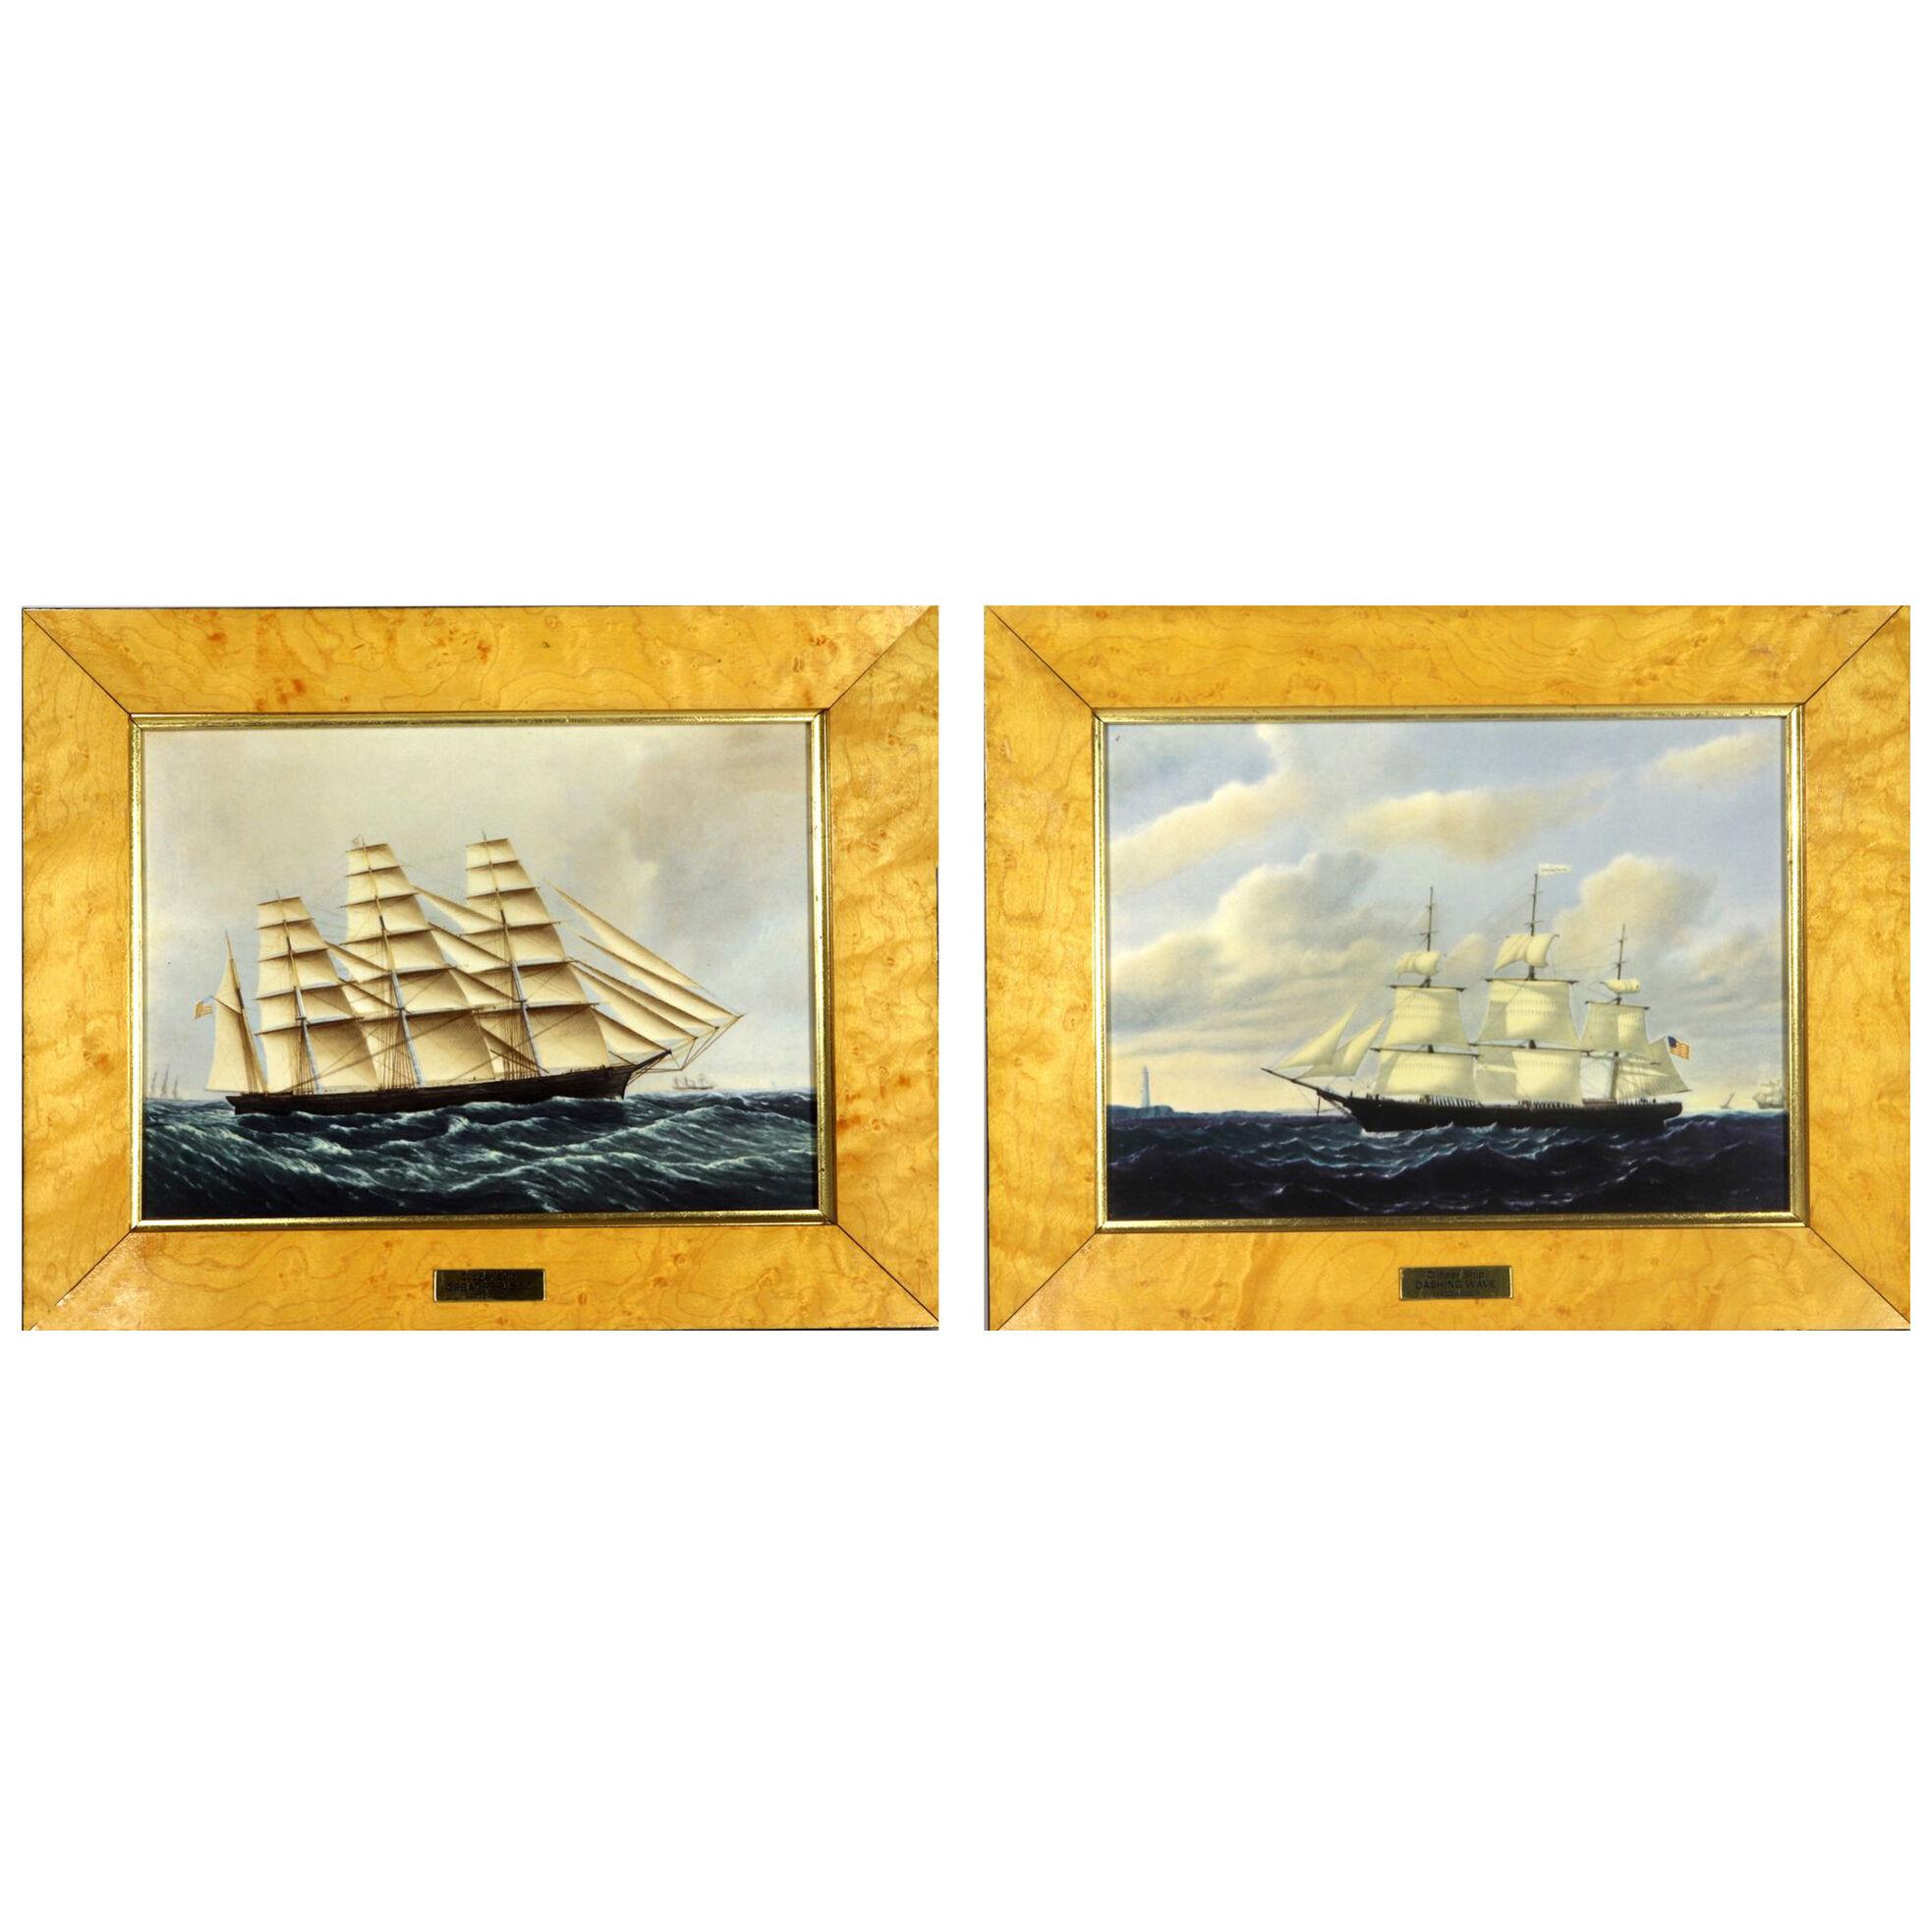 Wedgwood Porcelain Plaques of  Ships  The Great Republic and The Dashing Wave